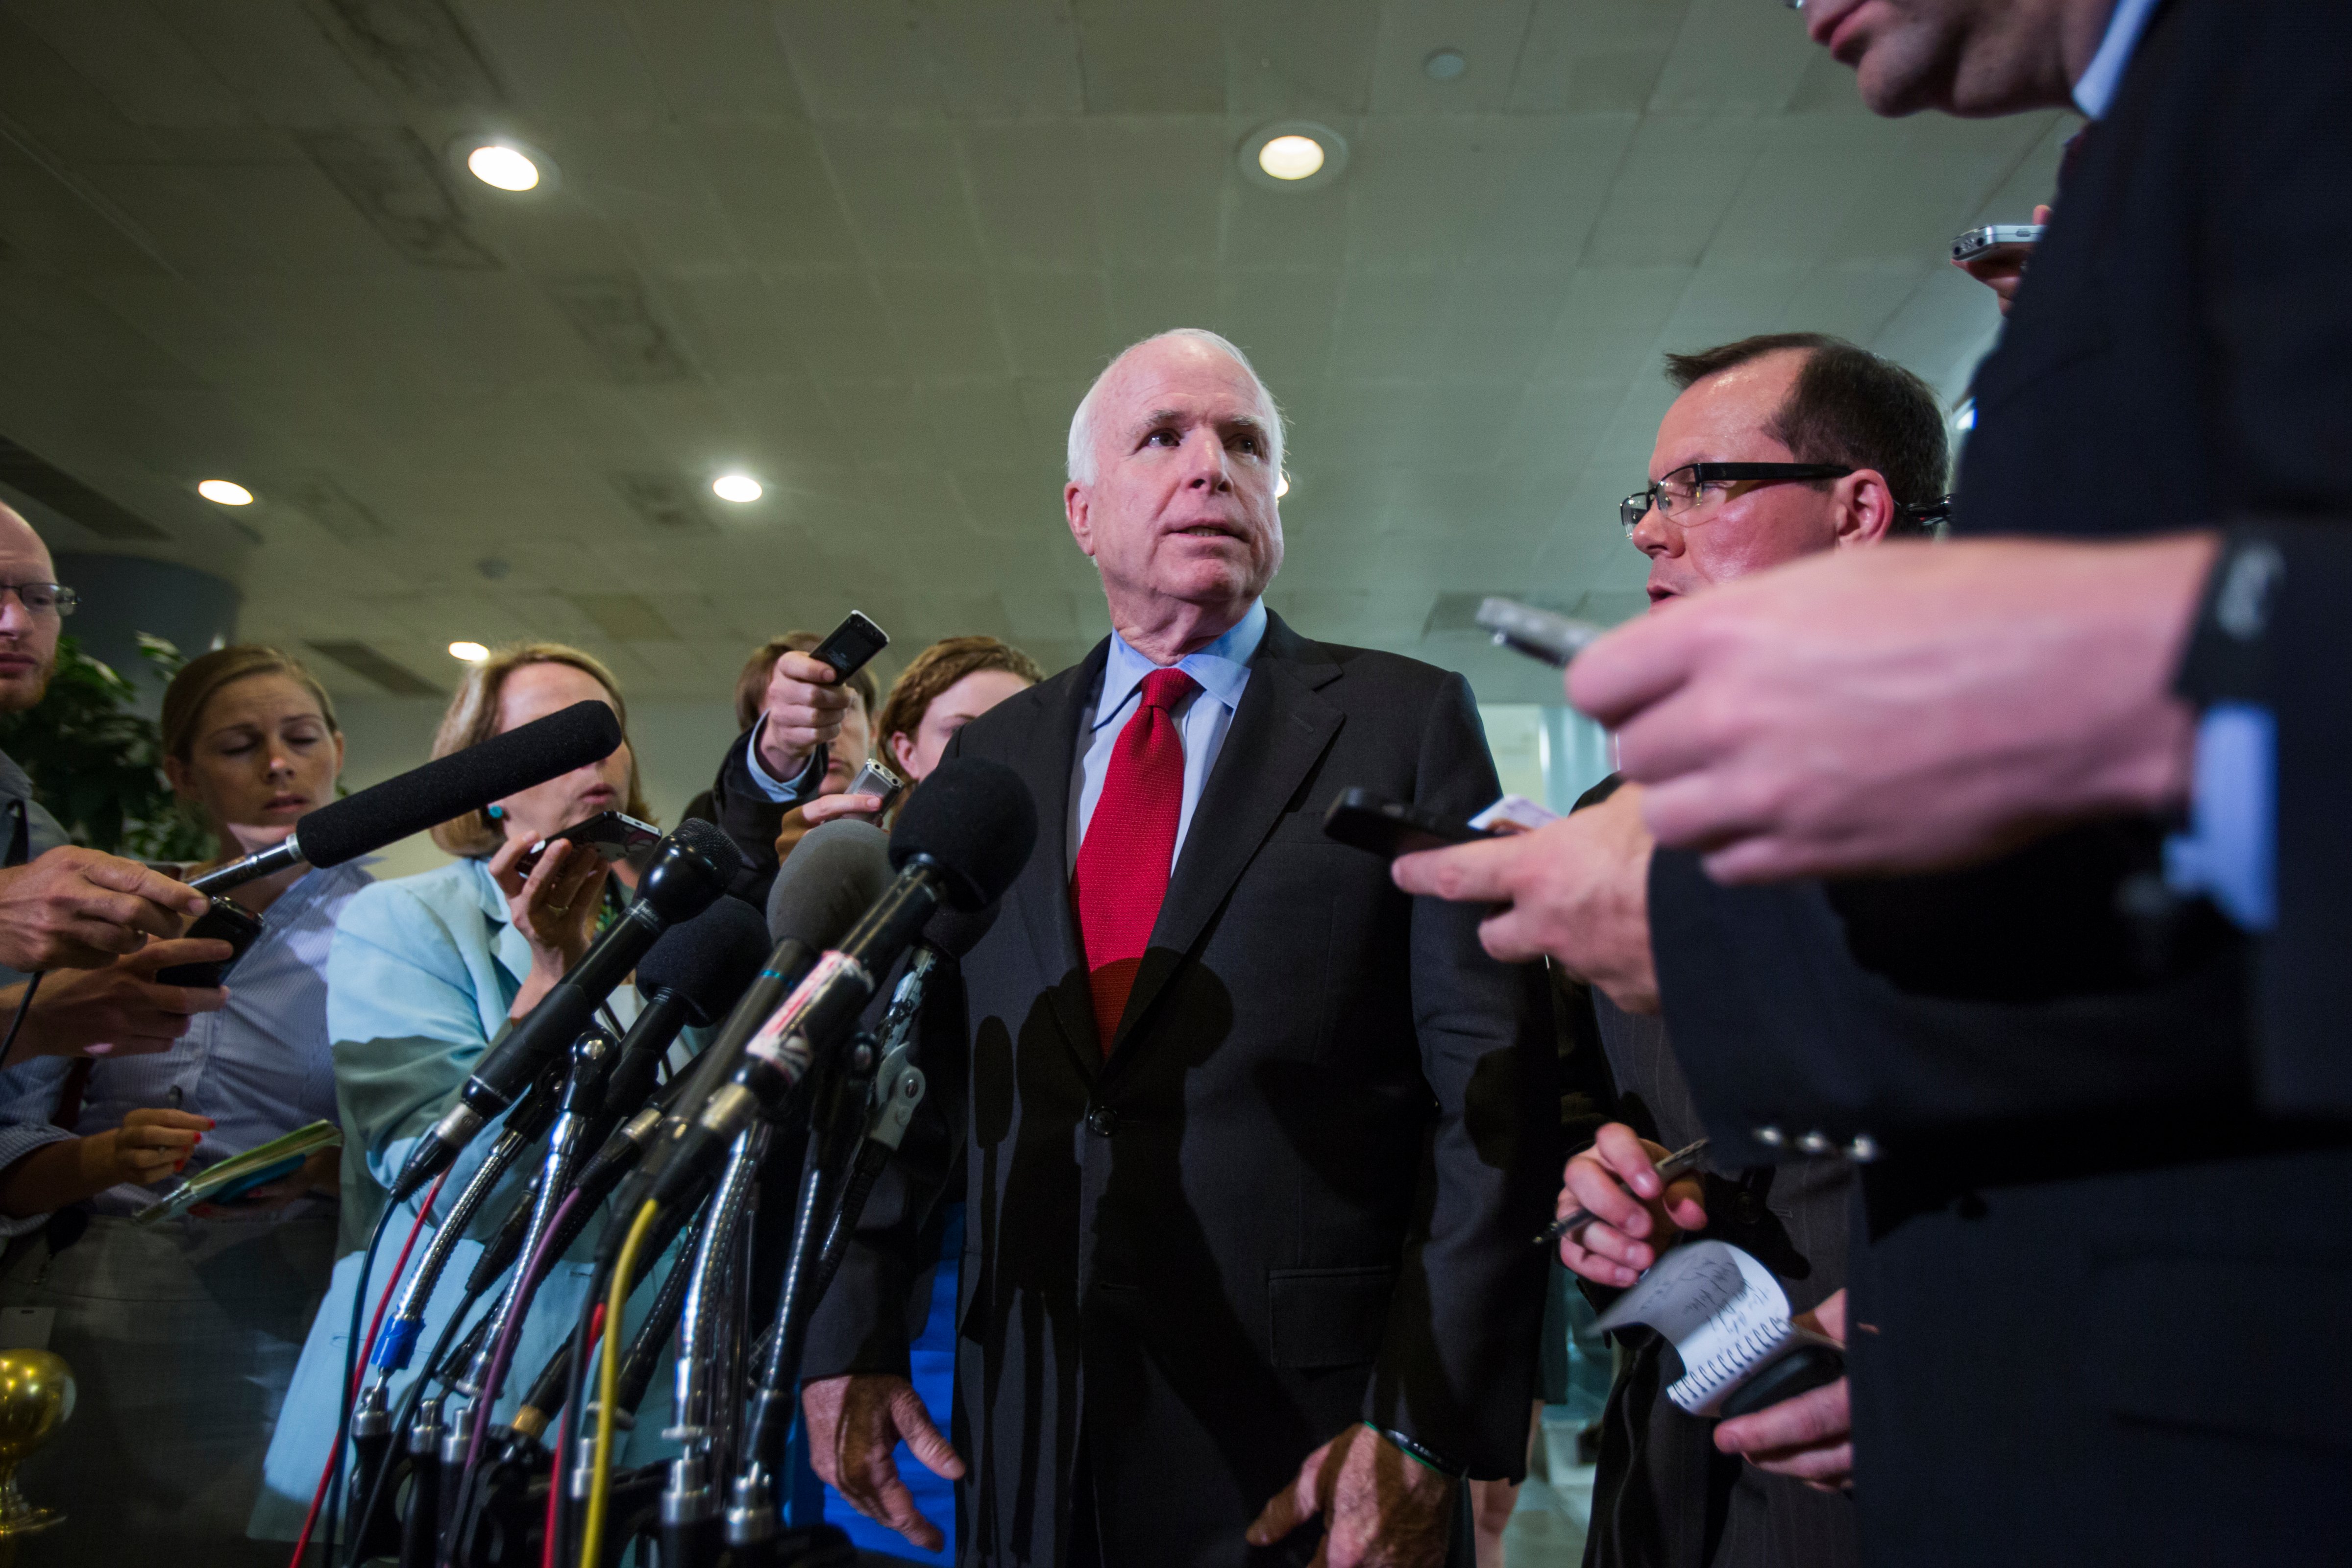 Republican Senator from Arizona John McCain, center, speaks to the media after a briefing by Obama administration officials to all U.S. Senators about the release of American hostage Bowe Bergdahl in the U.S. Capitol in Washington, D.C., June 4, 2014. (Jim Lo Scalzo—EPA)